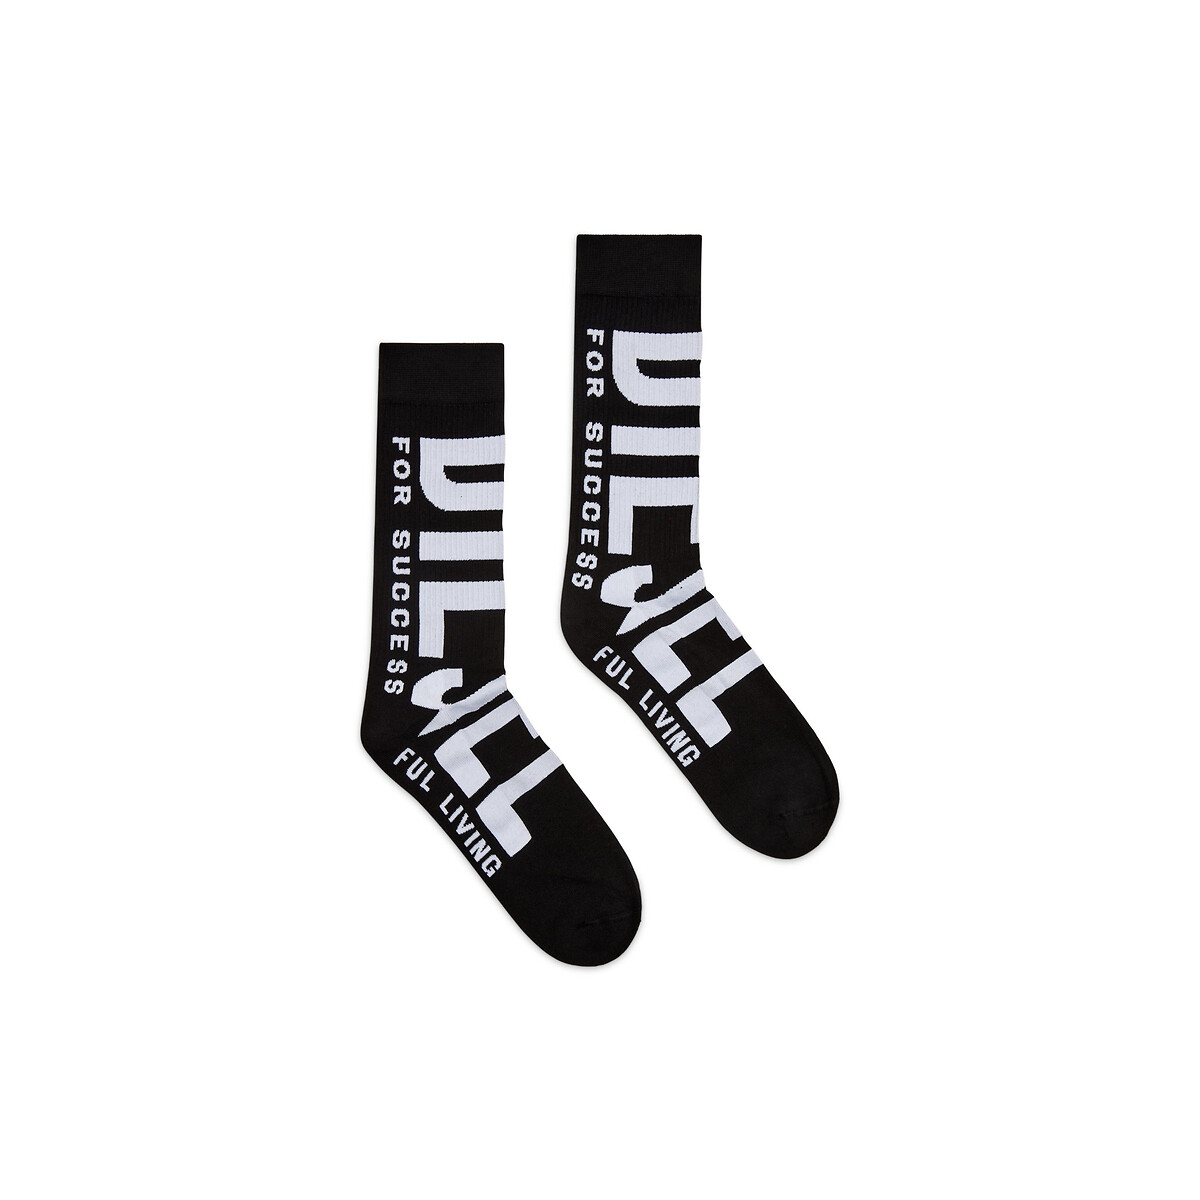 Pair of Crew Socks with Large Logo